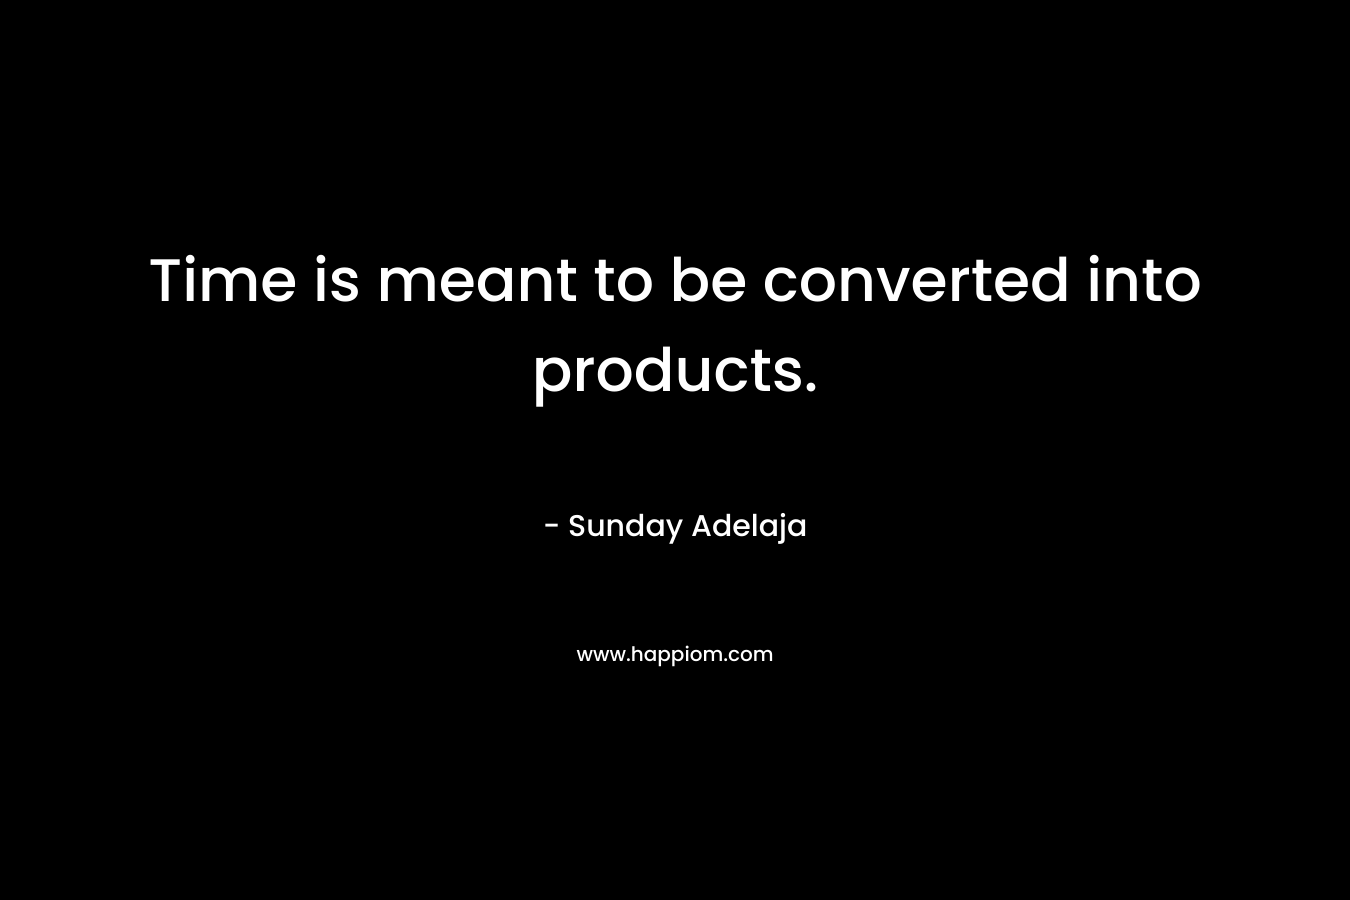 Time is meant to be converted into products.